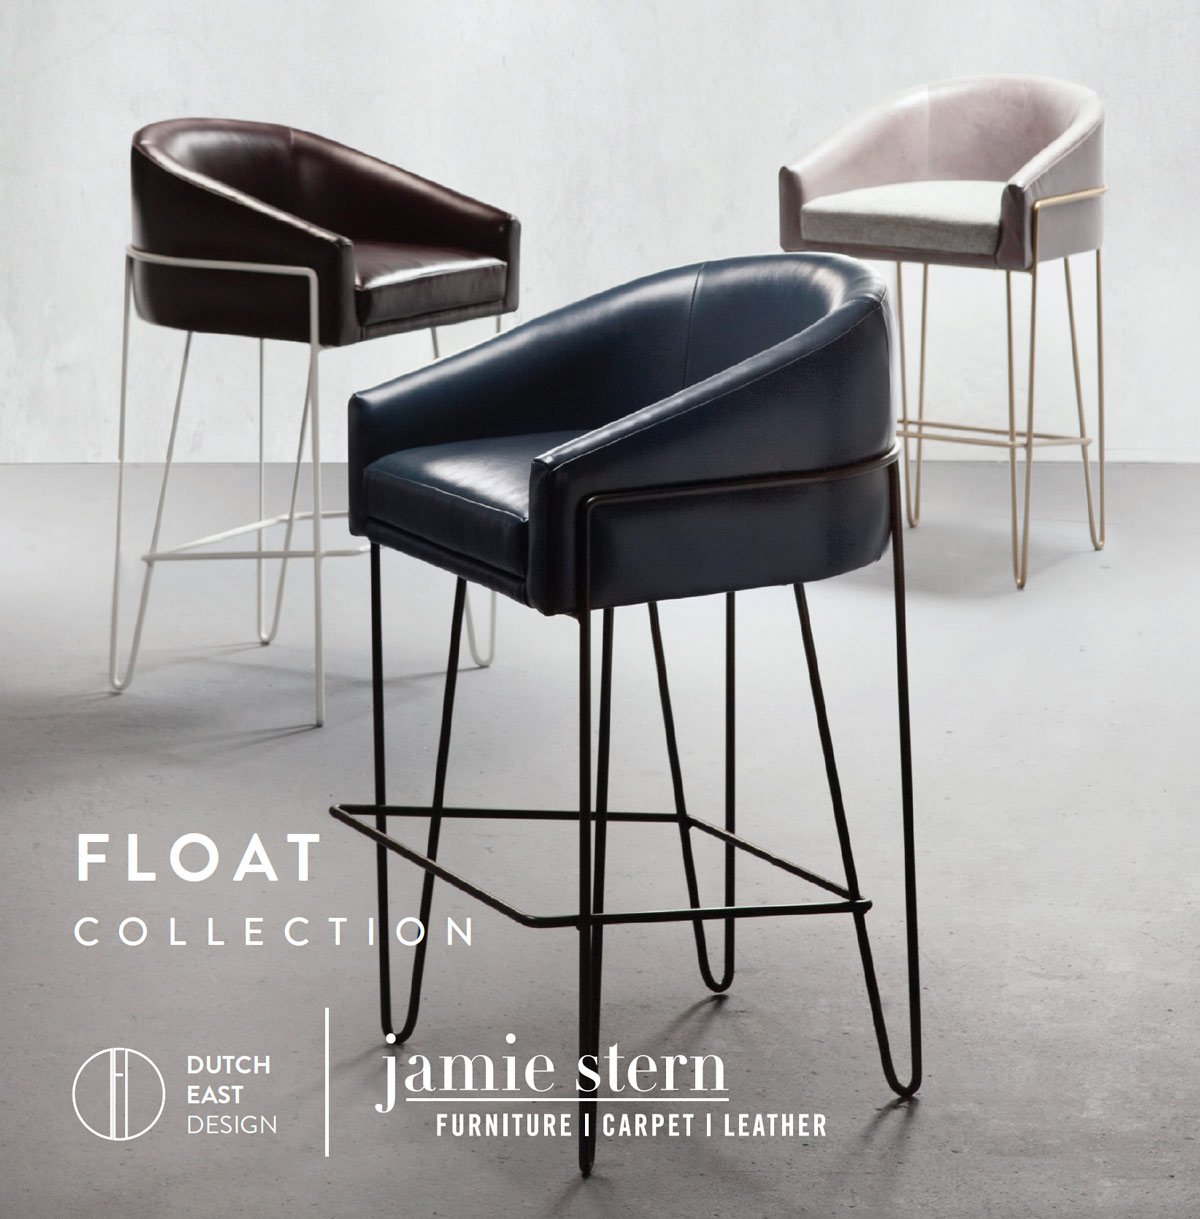 FLOAT Collection